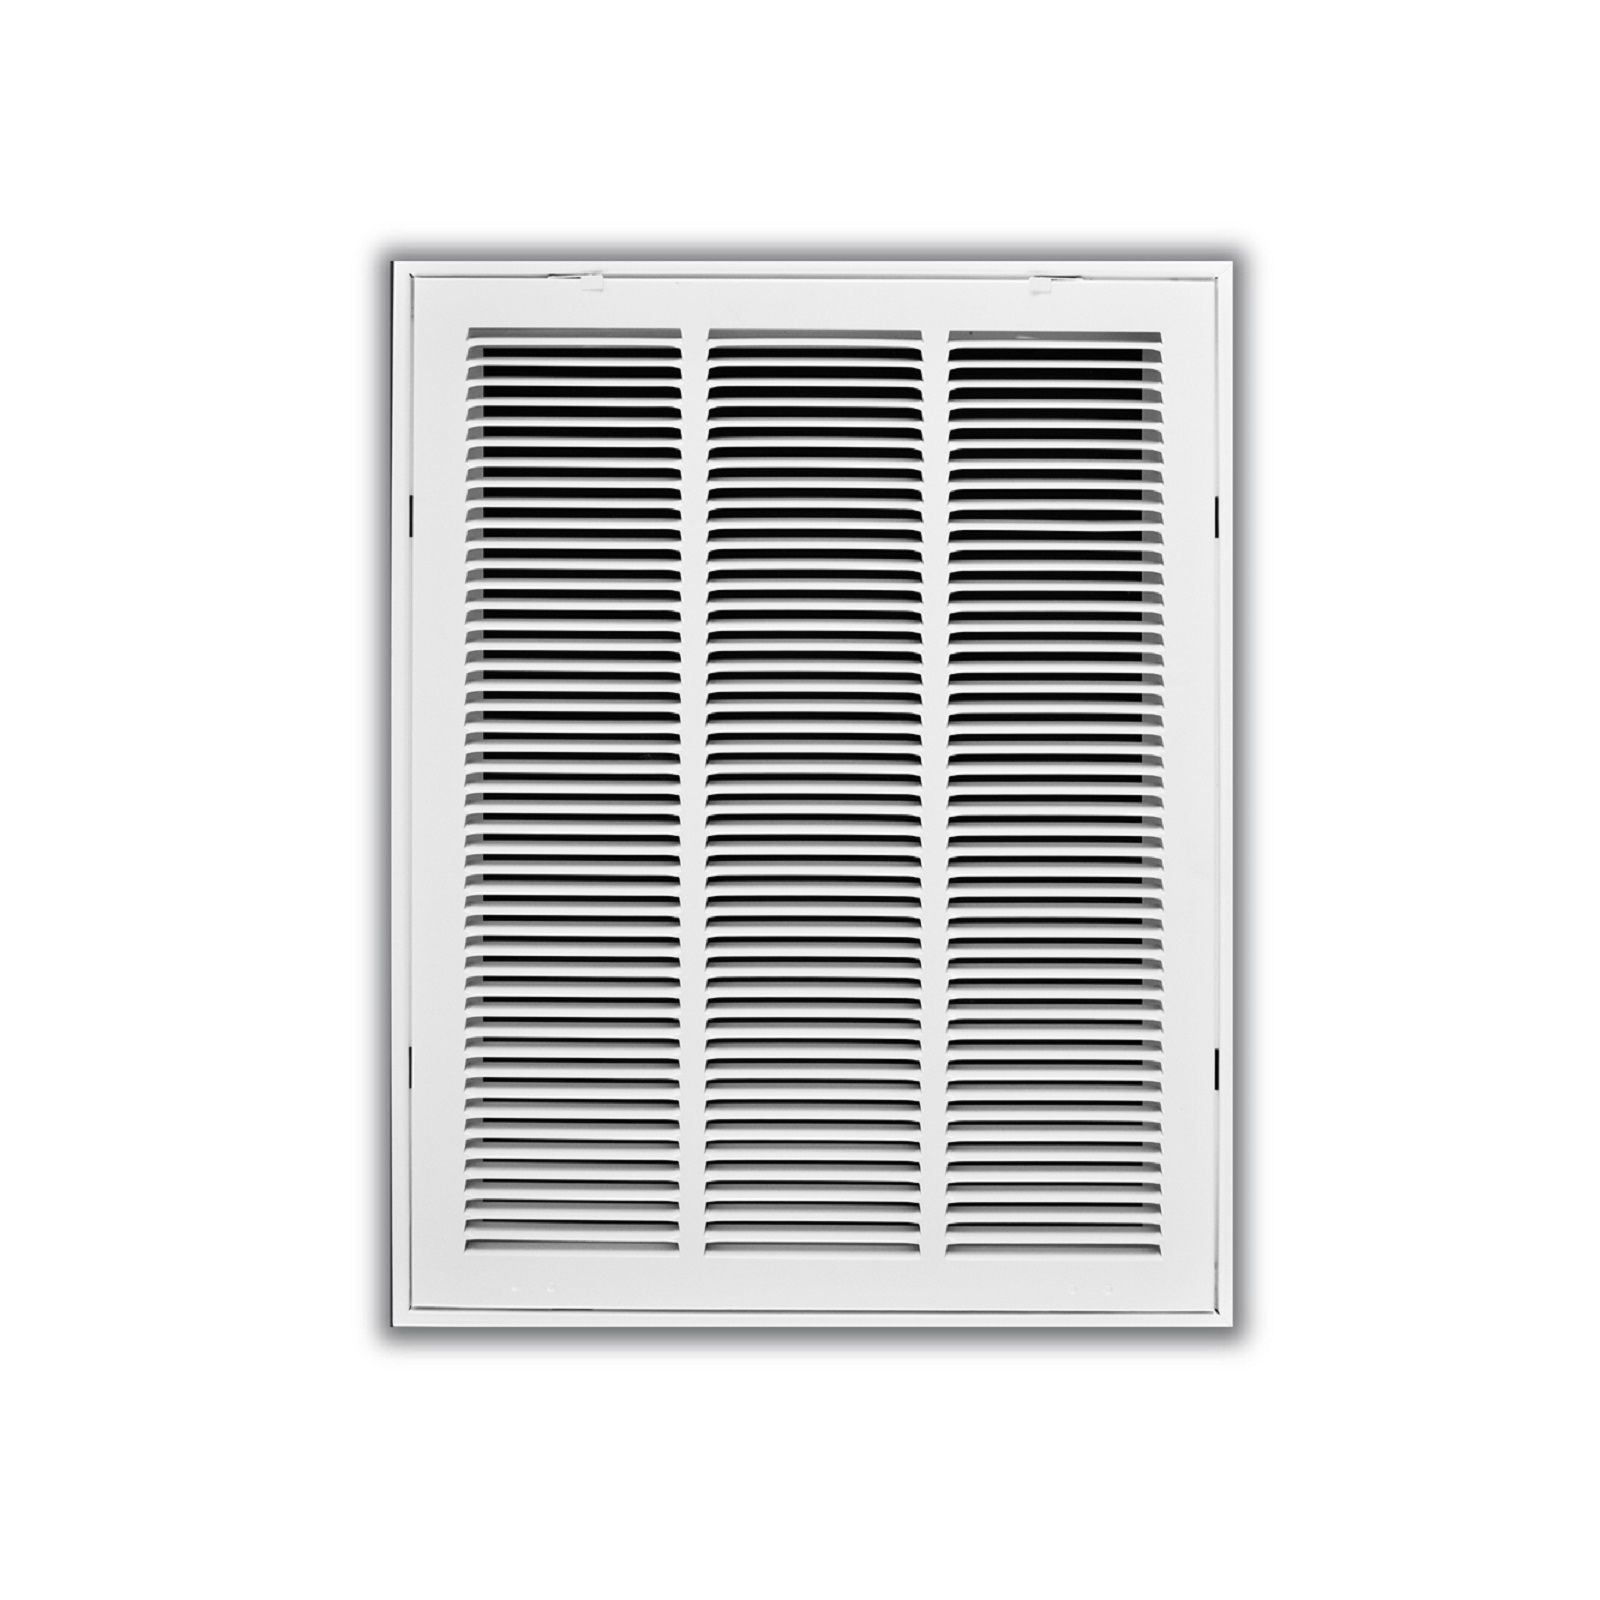 TRUaire 190 30X14 - Steel Return Air Filter Grille With Fixed Hinged Face, White, 30" X 14"